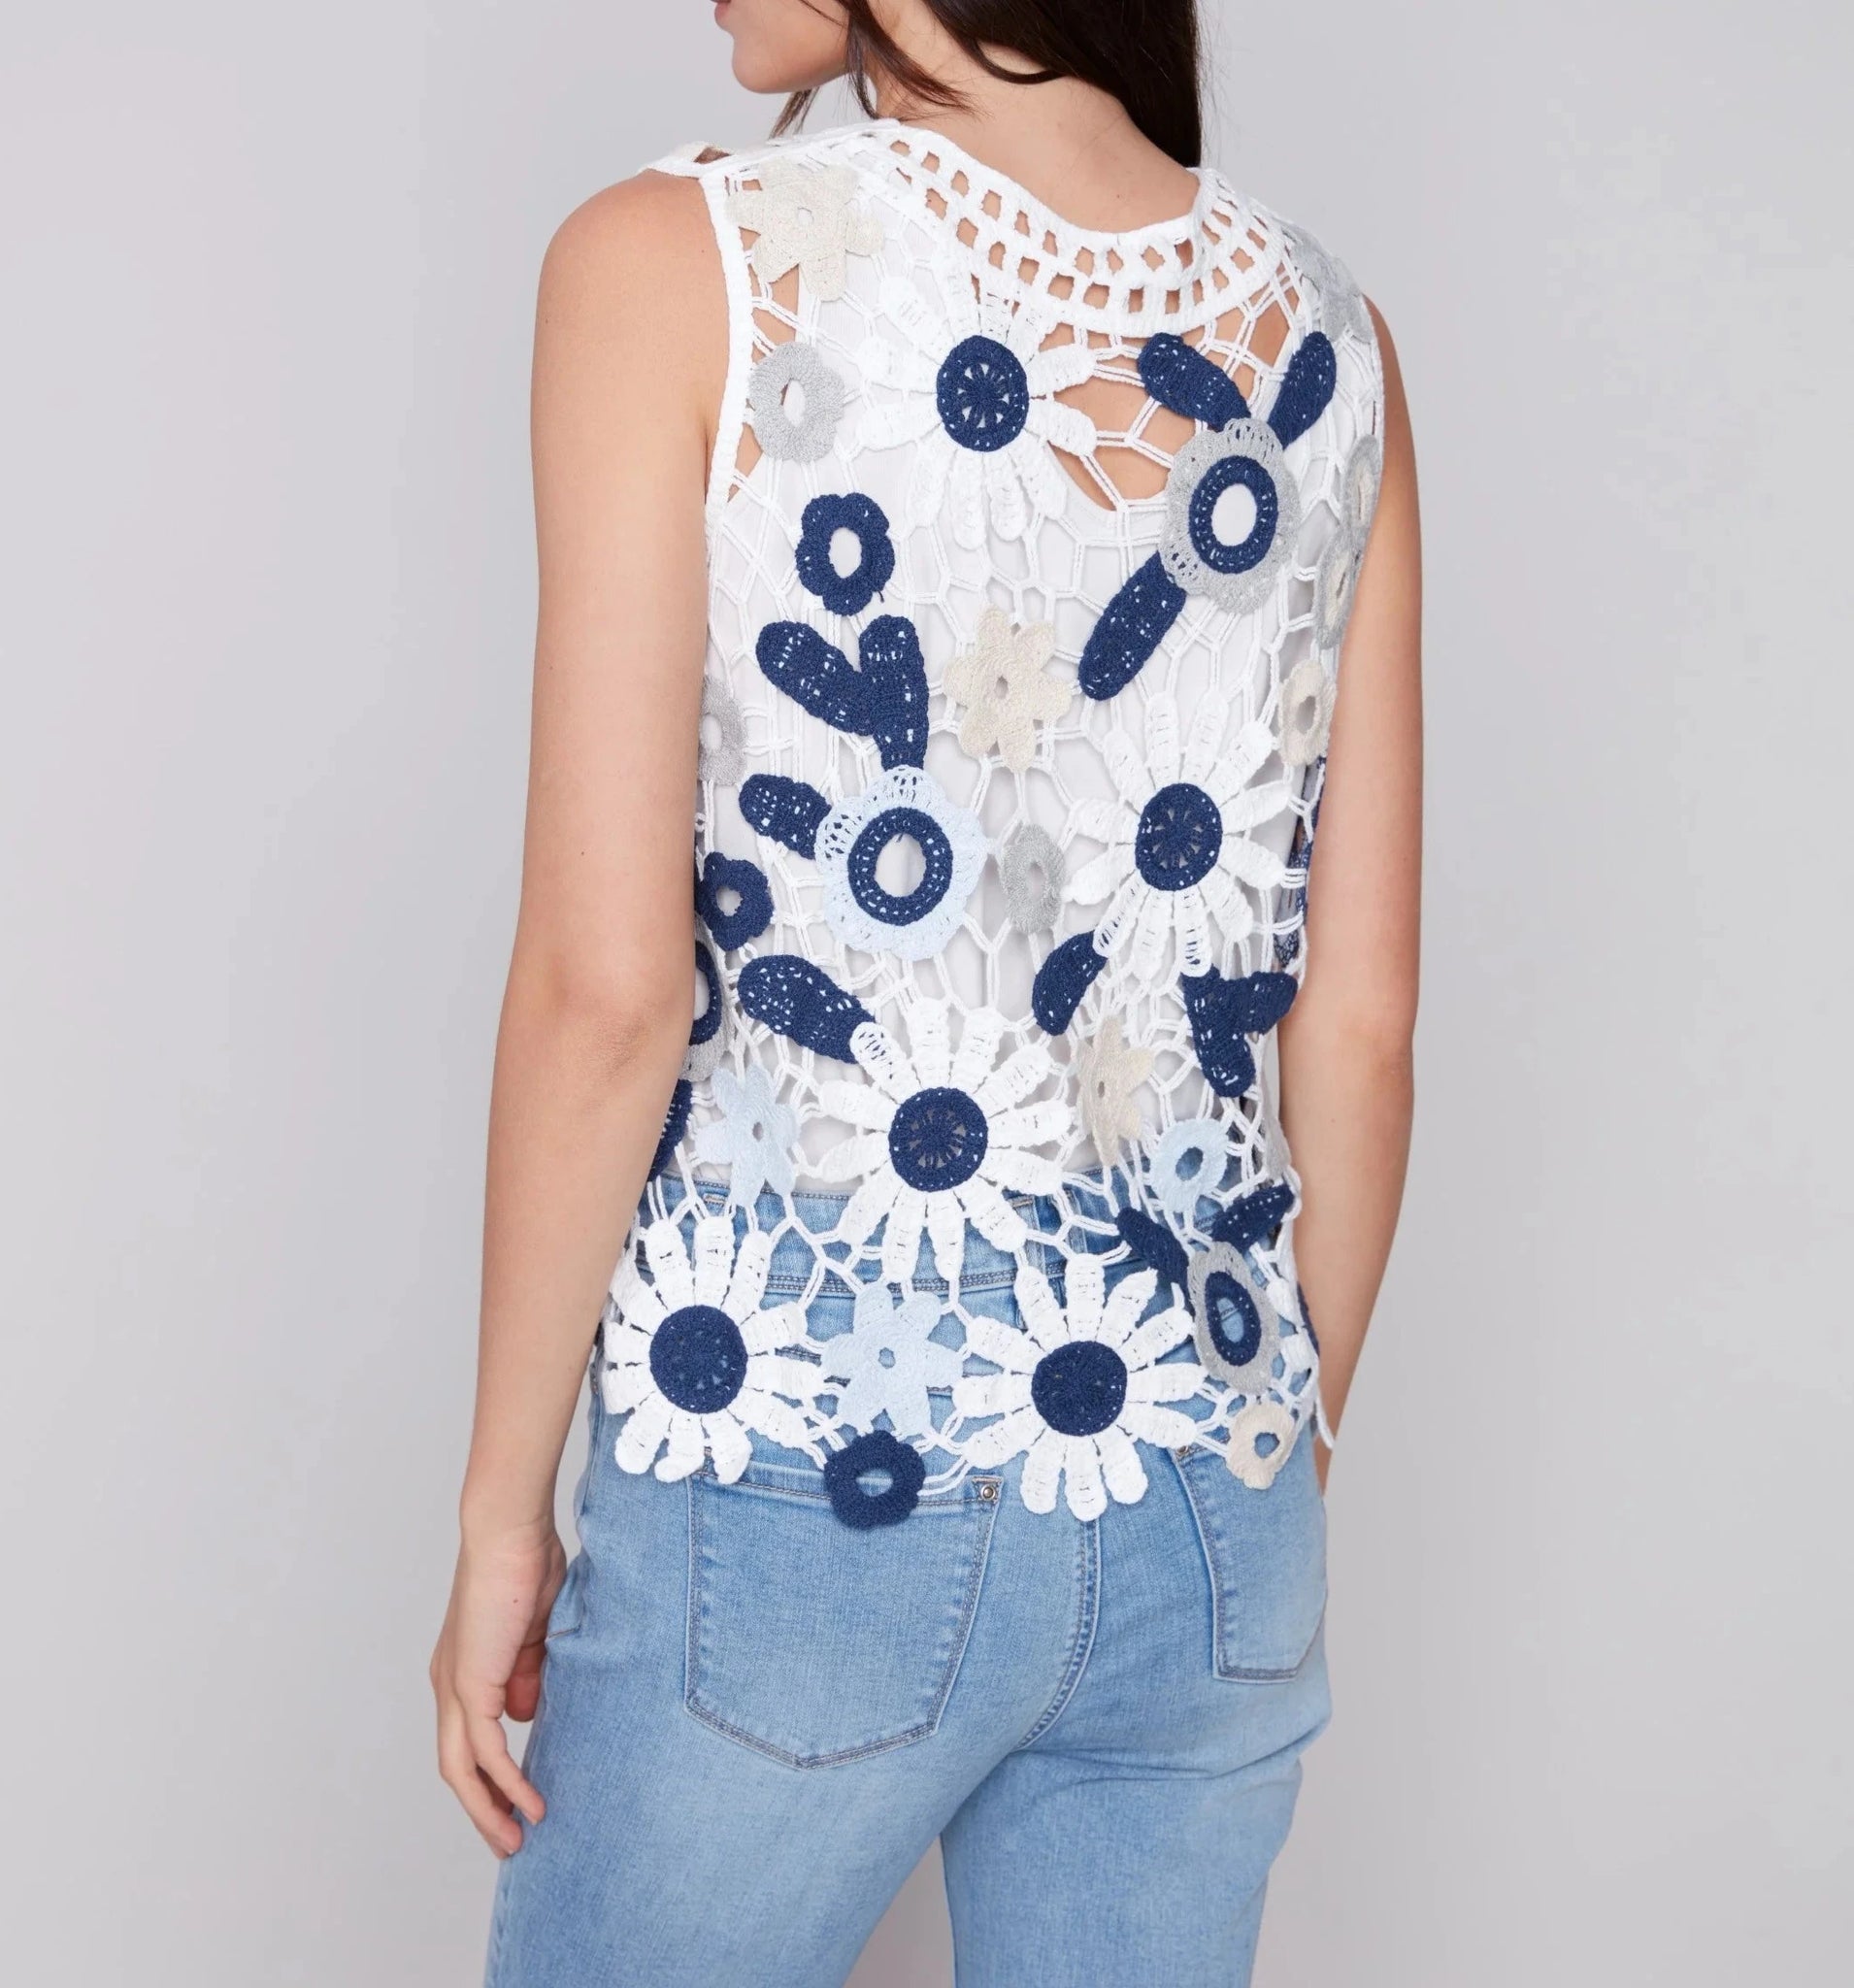 Sleeveless Crochet Top with Floral Pattern - Celadon